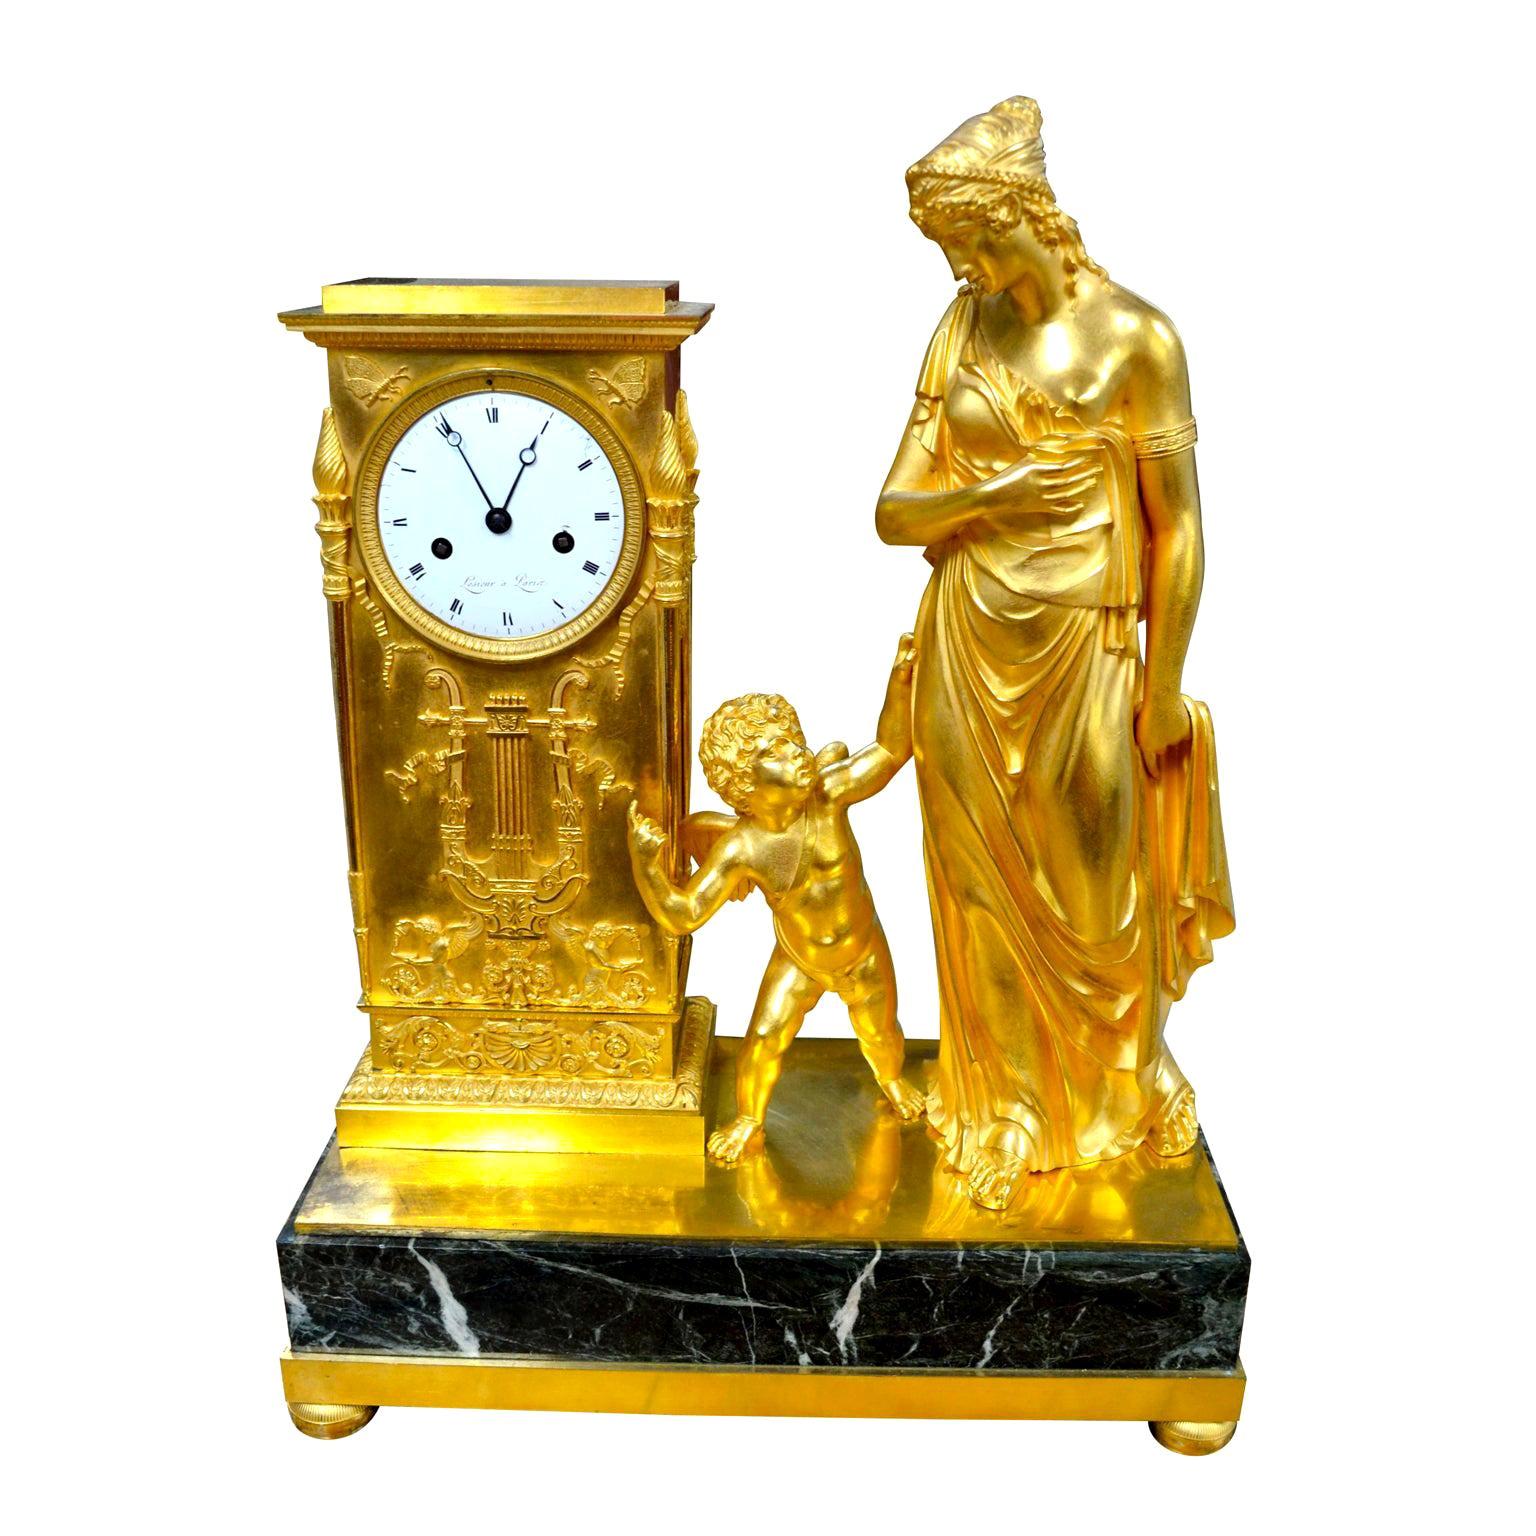 French Empire Allegorical Clock Depicting "Venus Guided by Love" by Lesieur